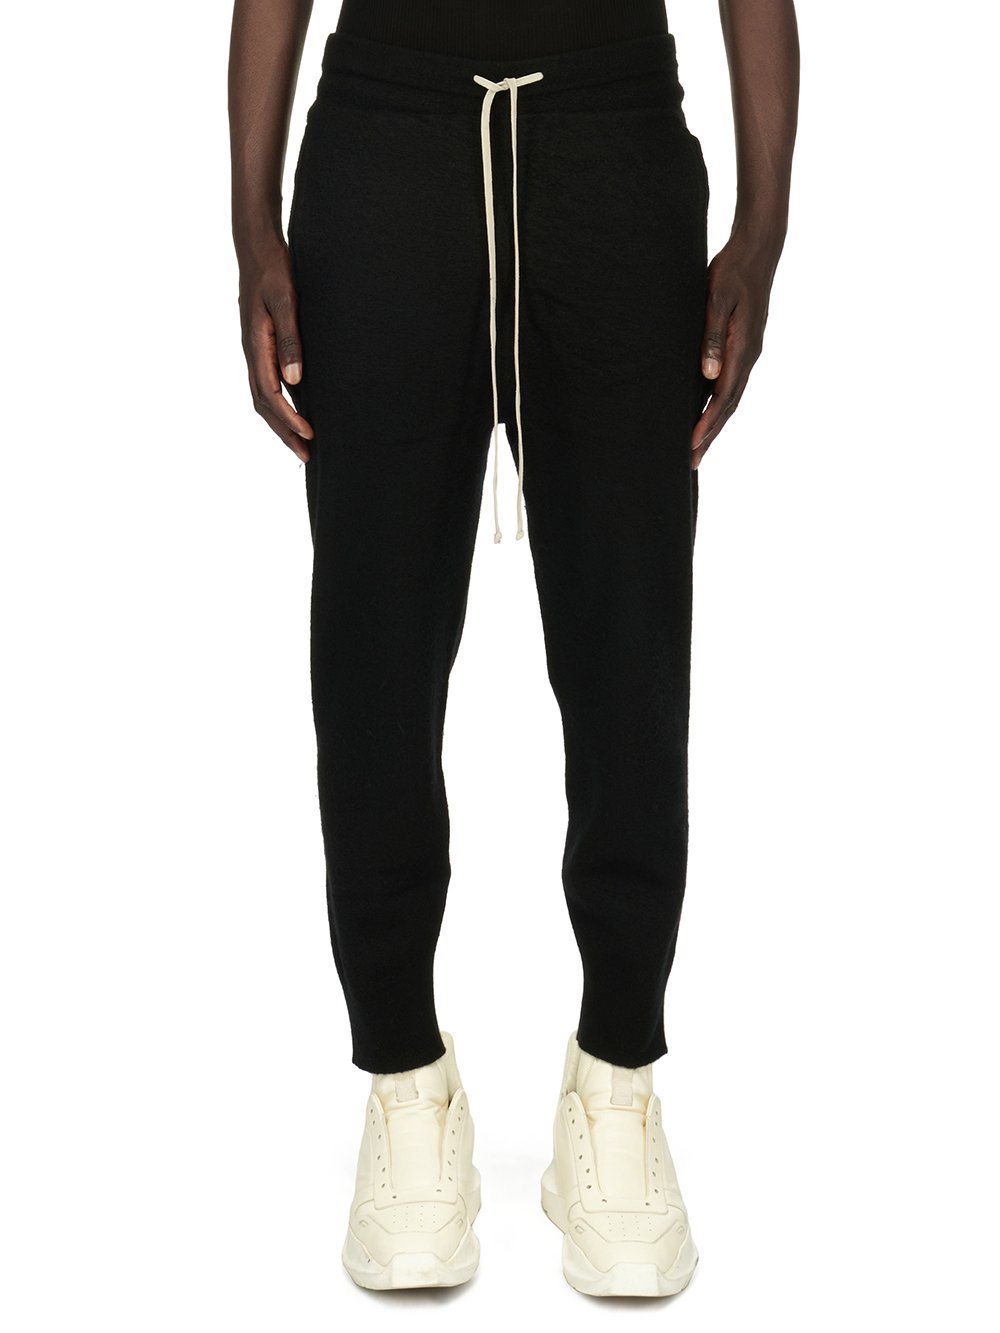 RICK OWENS FW23 LUXOR TRACK PANTS IN BLACK BOILED CASHMERE KNIT